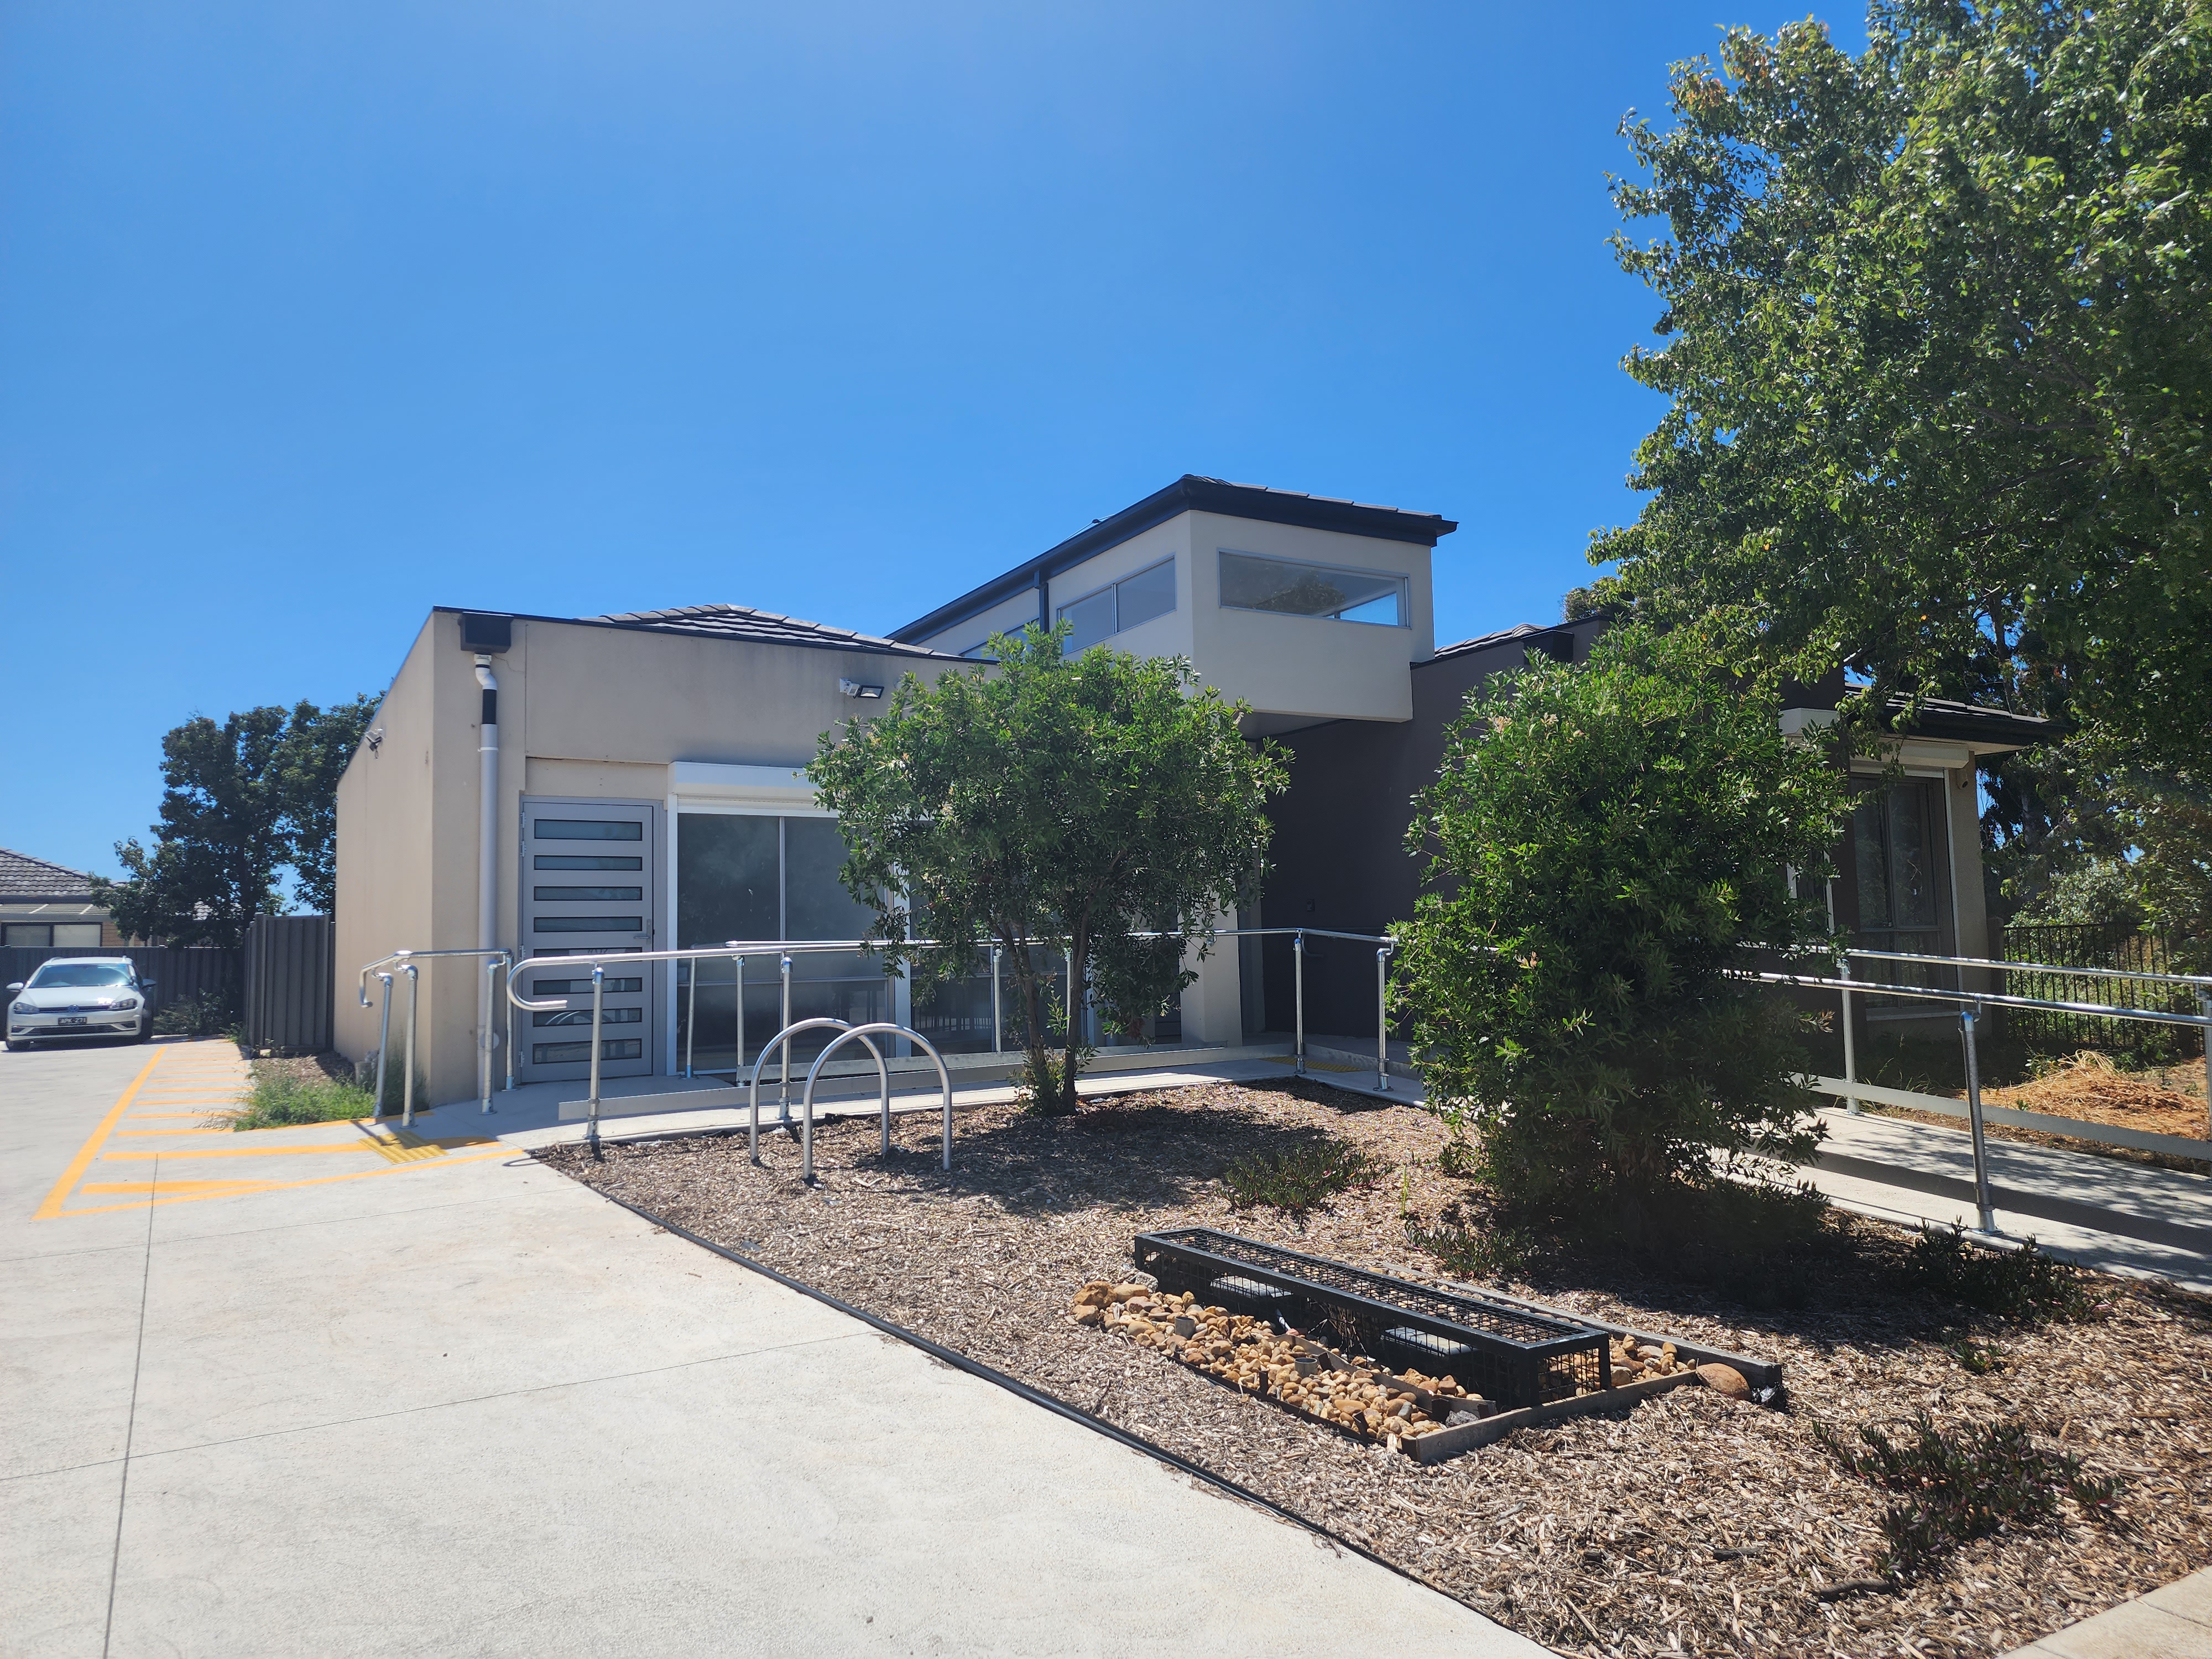 Welcome to Central Veterinary Clinic & Hospital – Tarneit